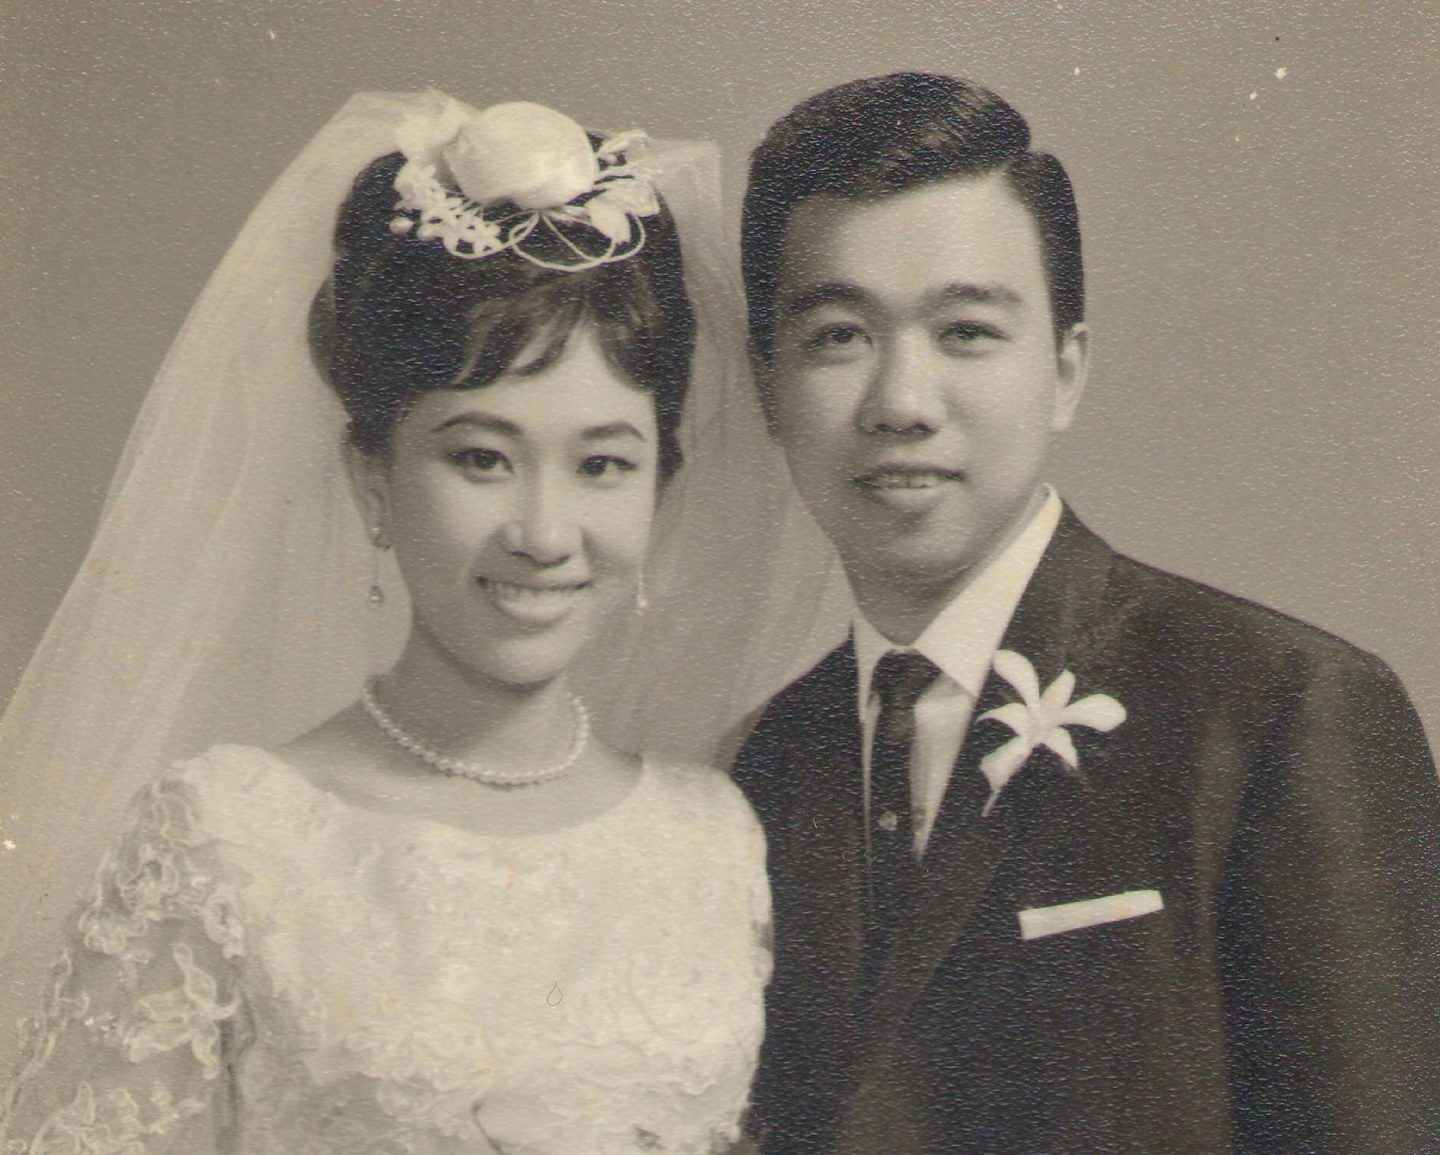 My parents at their wedding in 1966.